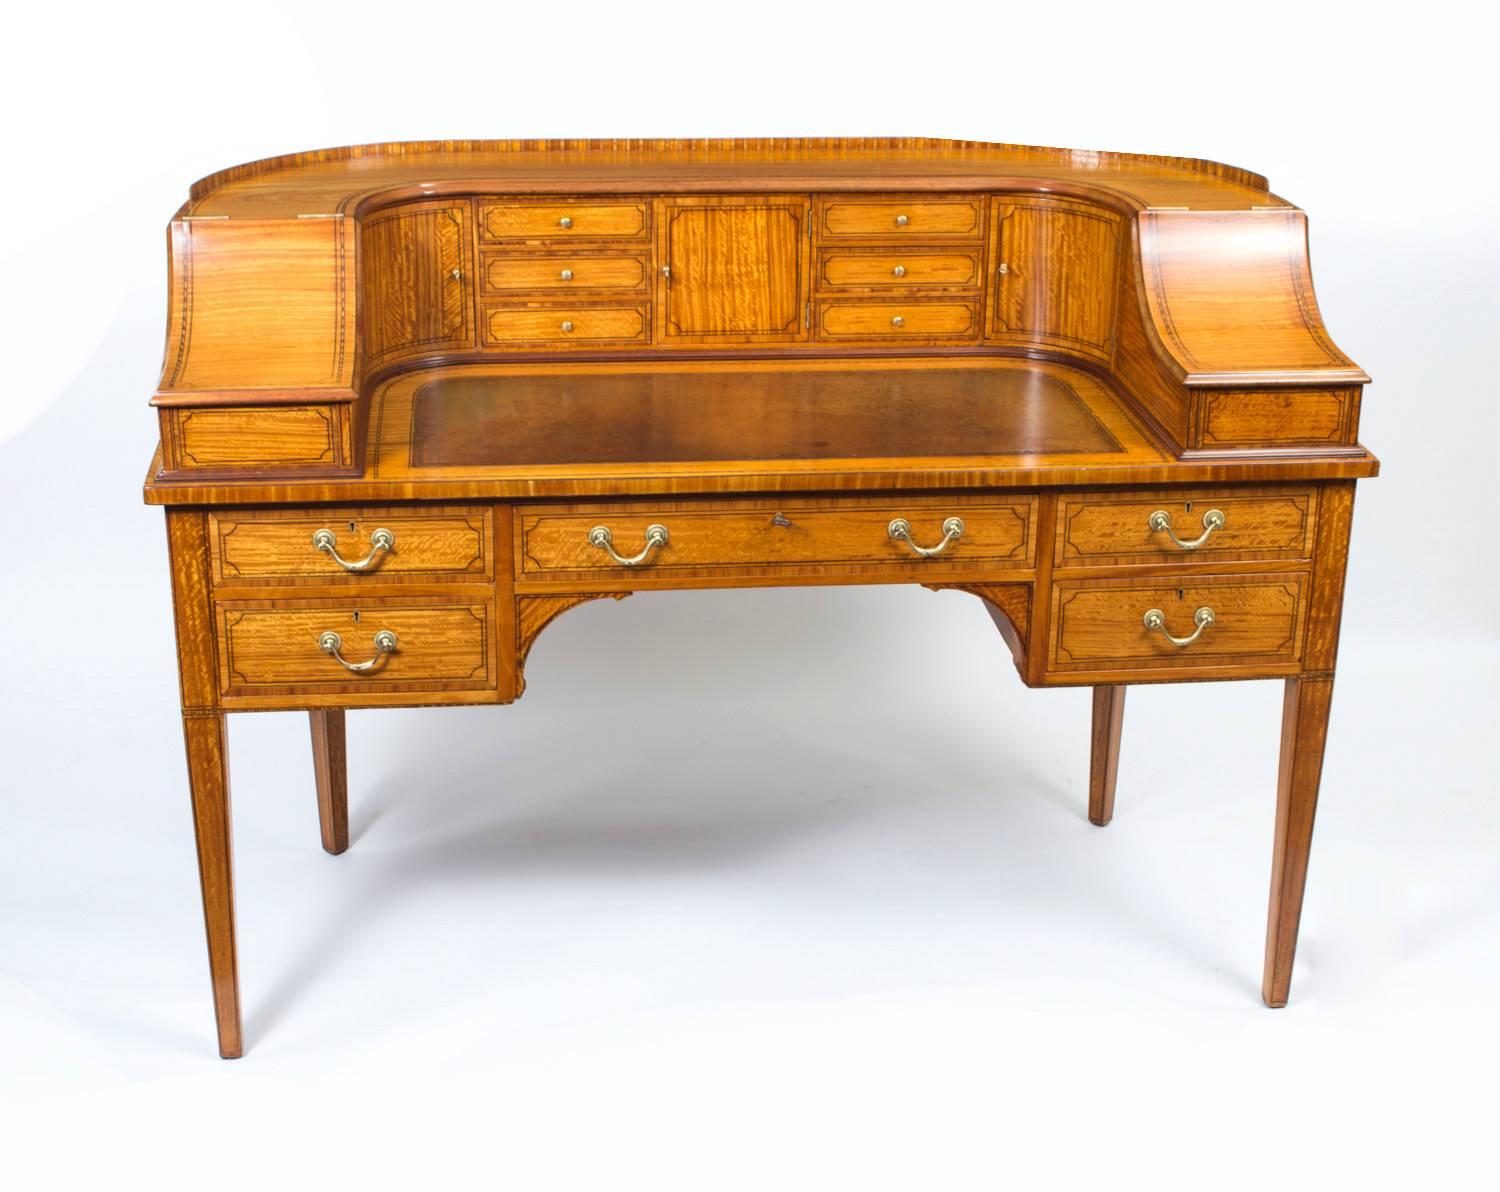 This is a beautiful antique late Victorian satinwood Carlton House Desk, circa 1880 in date. 

This beautiful desk is made from satinwood, which has been crossbanded in Kingwood and has superb ebony line inlaid decoration. It is superbly finished